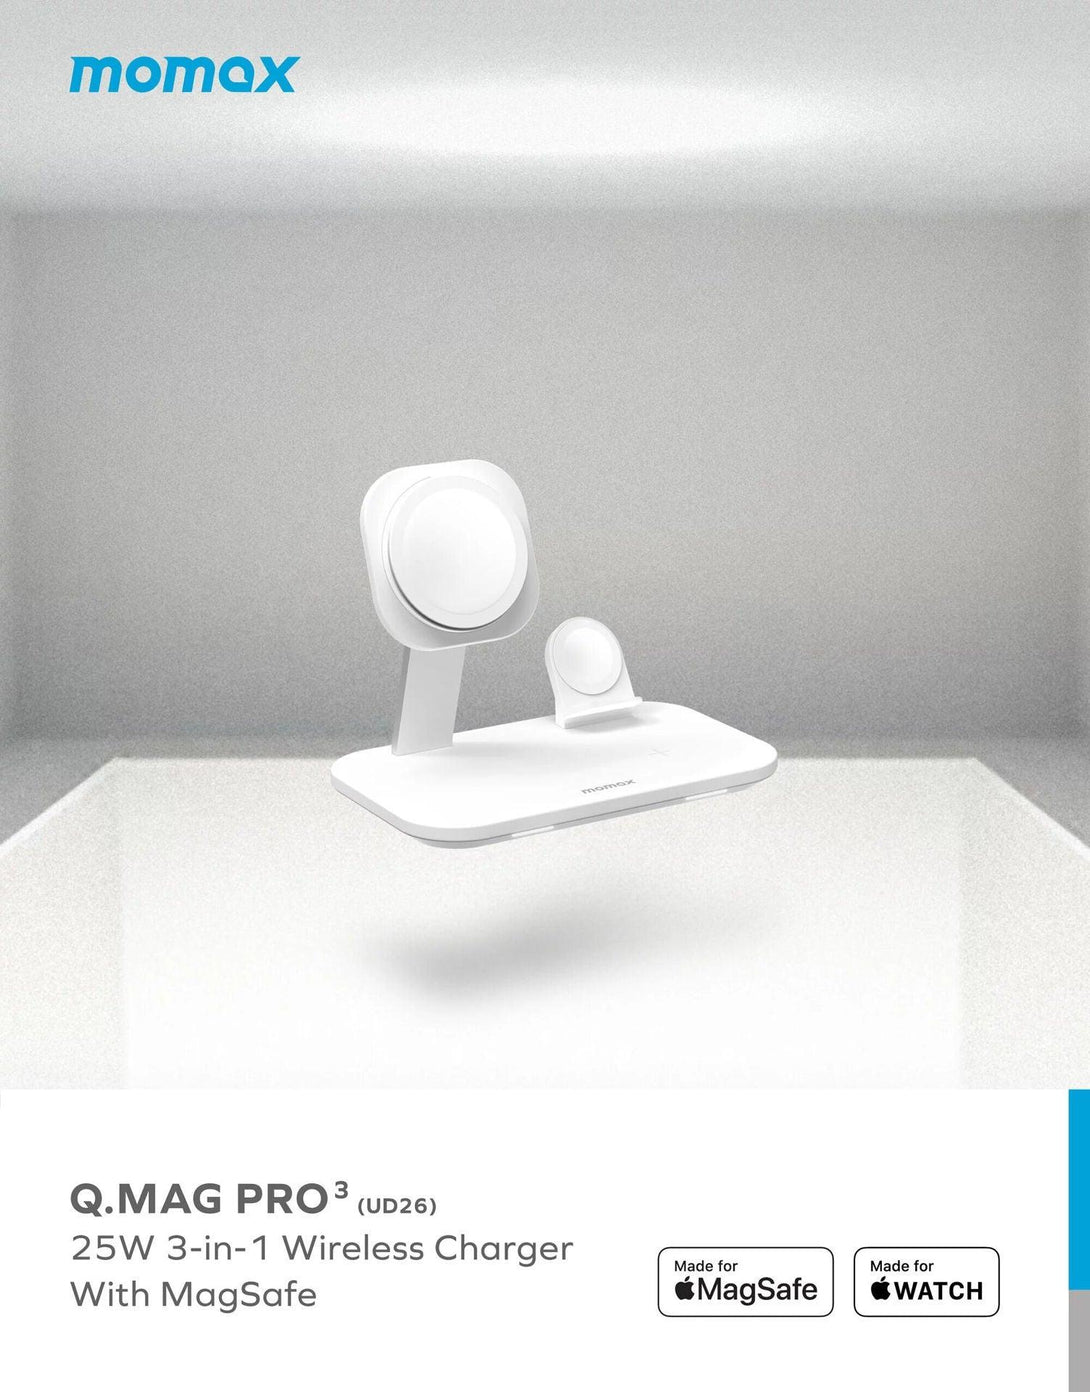 Momax Q.Mag Pro 3 25W 3 in 1 Wireless Charger with MagSafe - White - Tech Goods